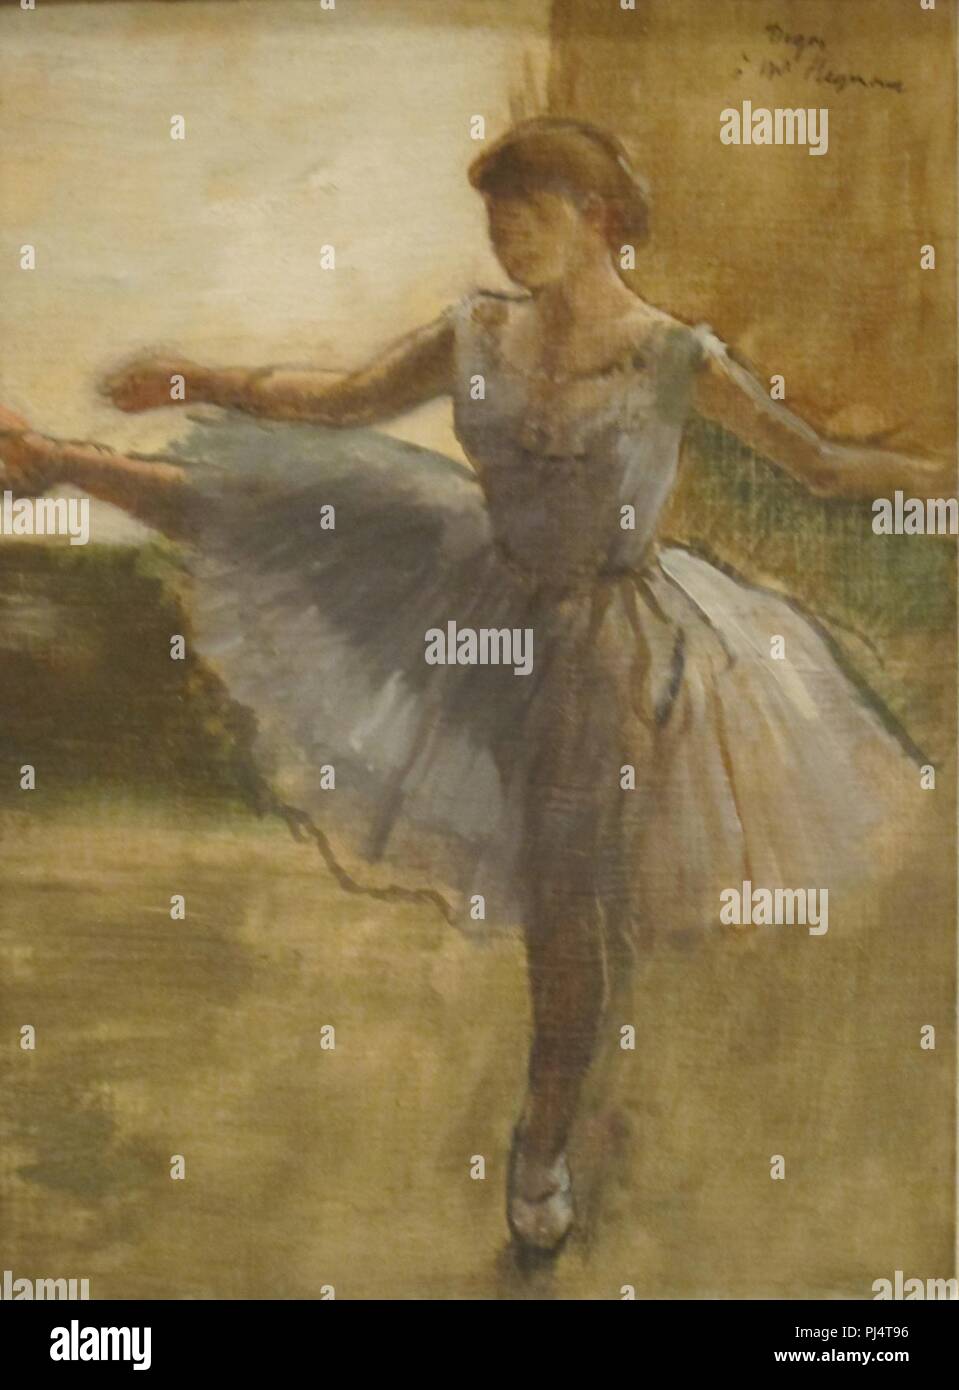 Degas Ballerina High Resolution Stock Photography and Images - Alamy